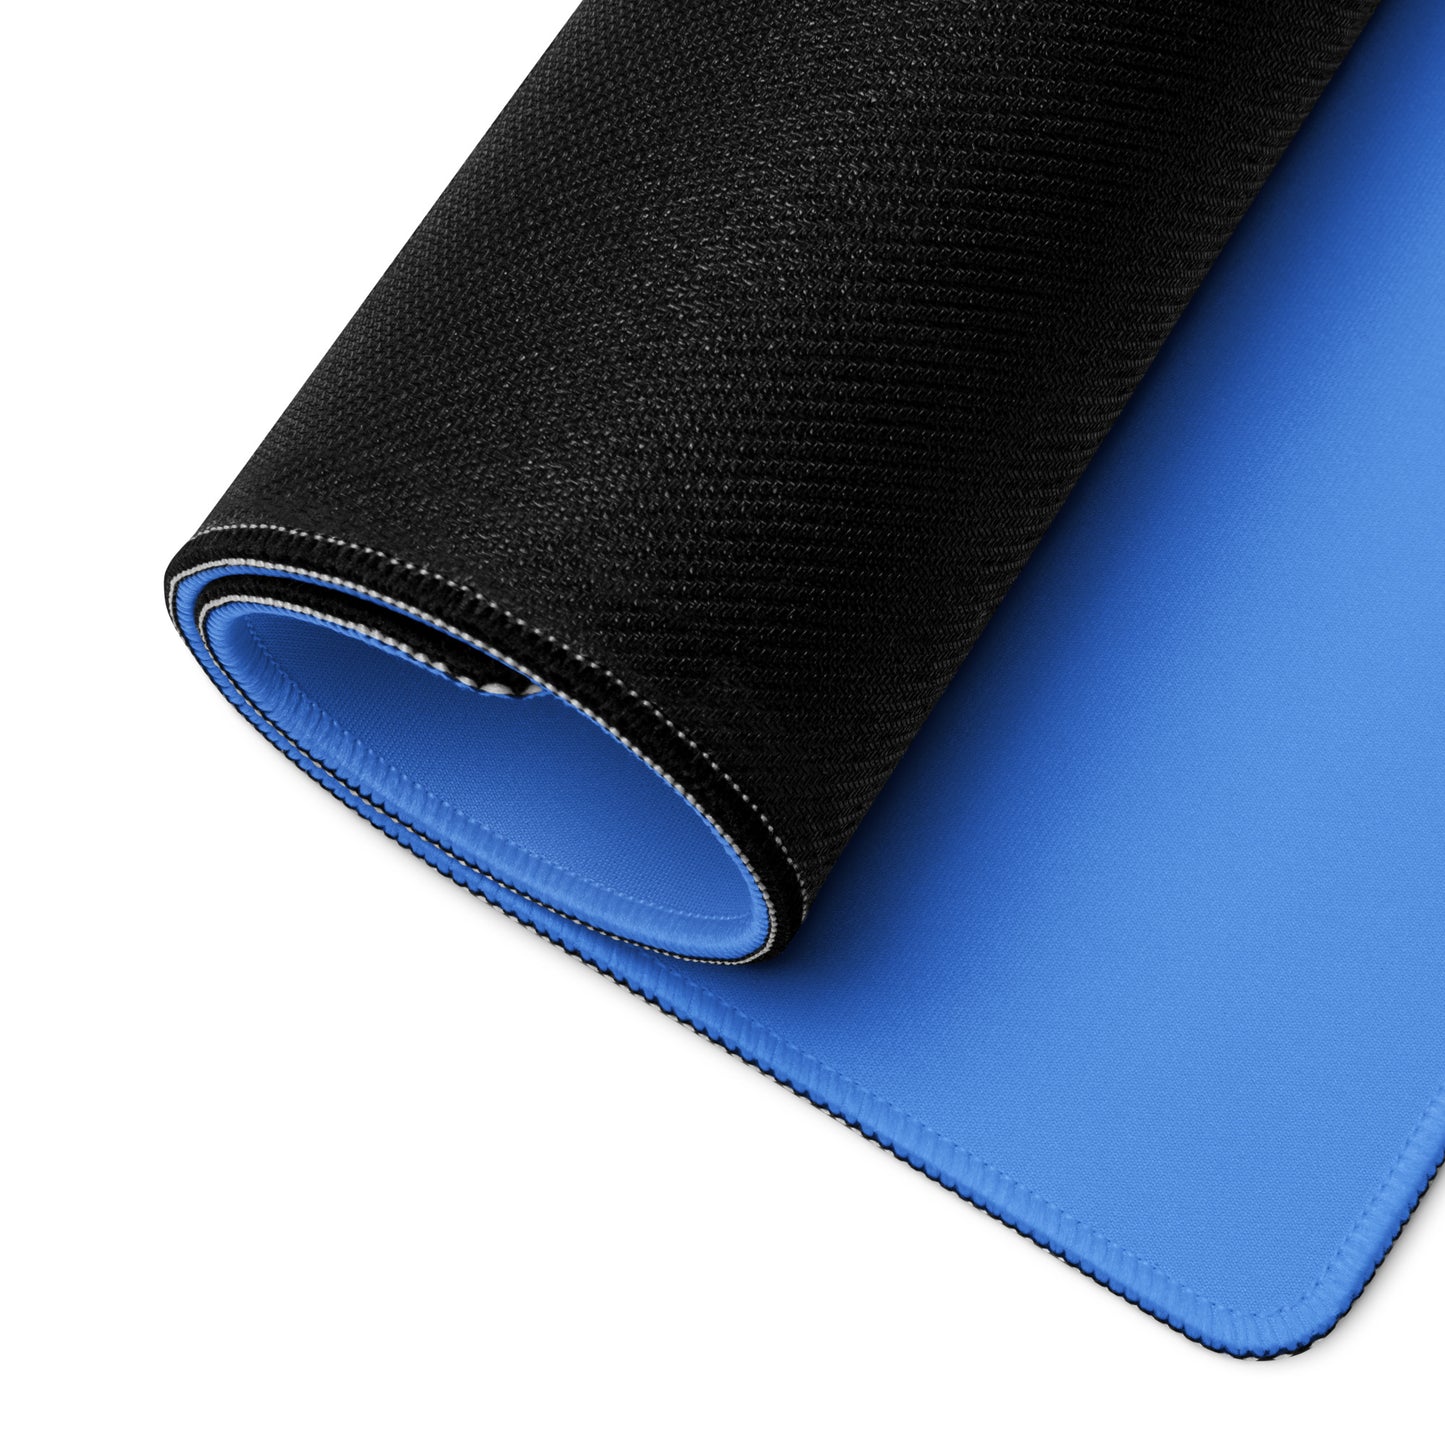 A blue 36" x 18" desk pad with two cowboys dueling rolled up.